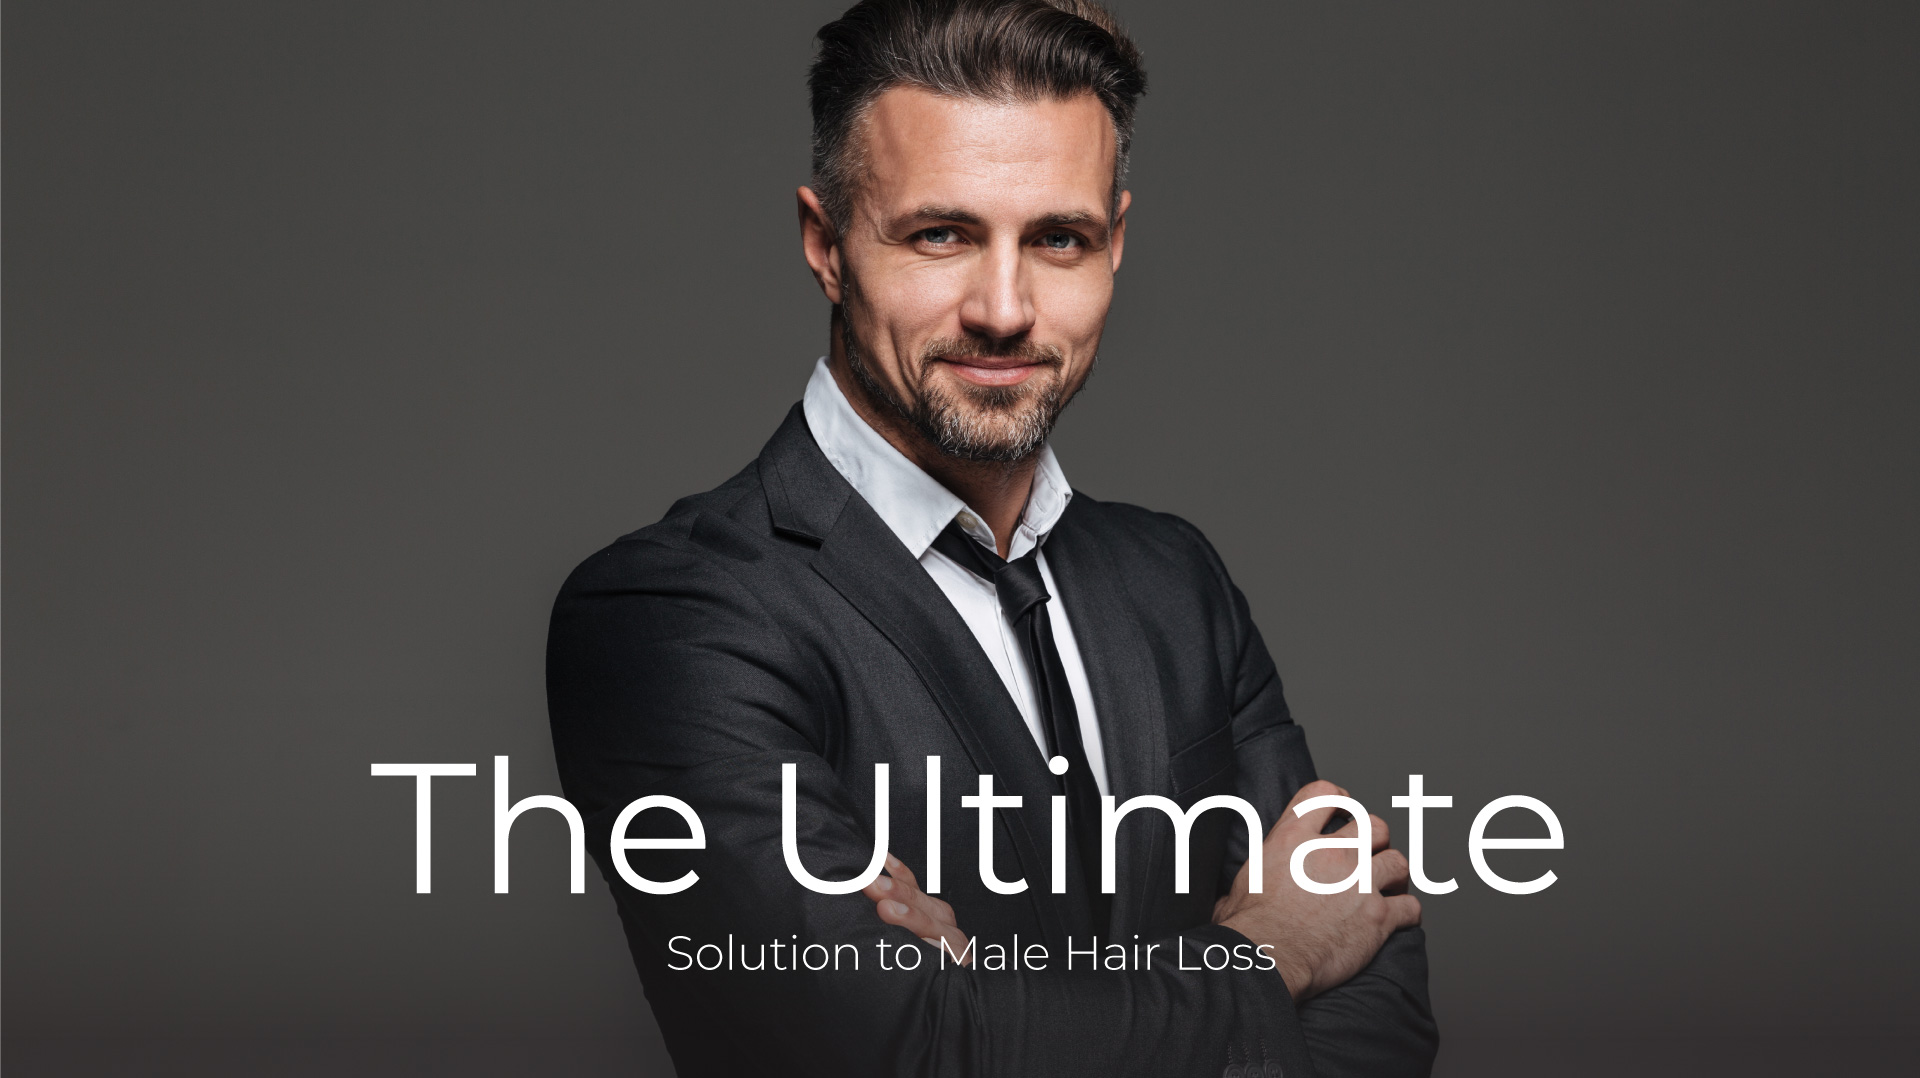 Hair Replacement For Men | Hair Patch For Men